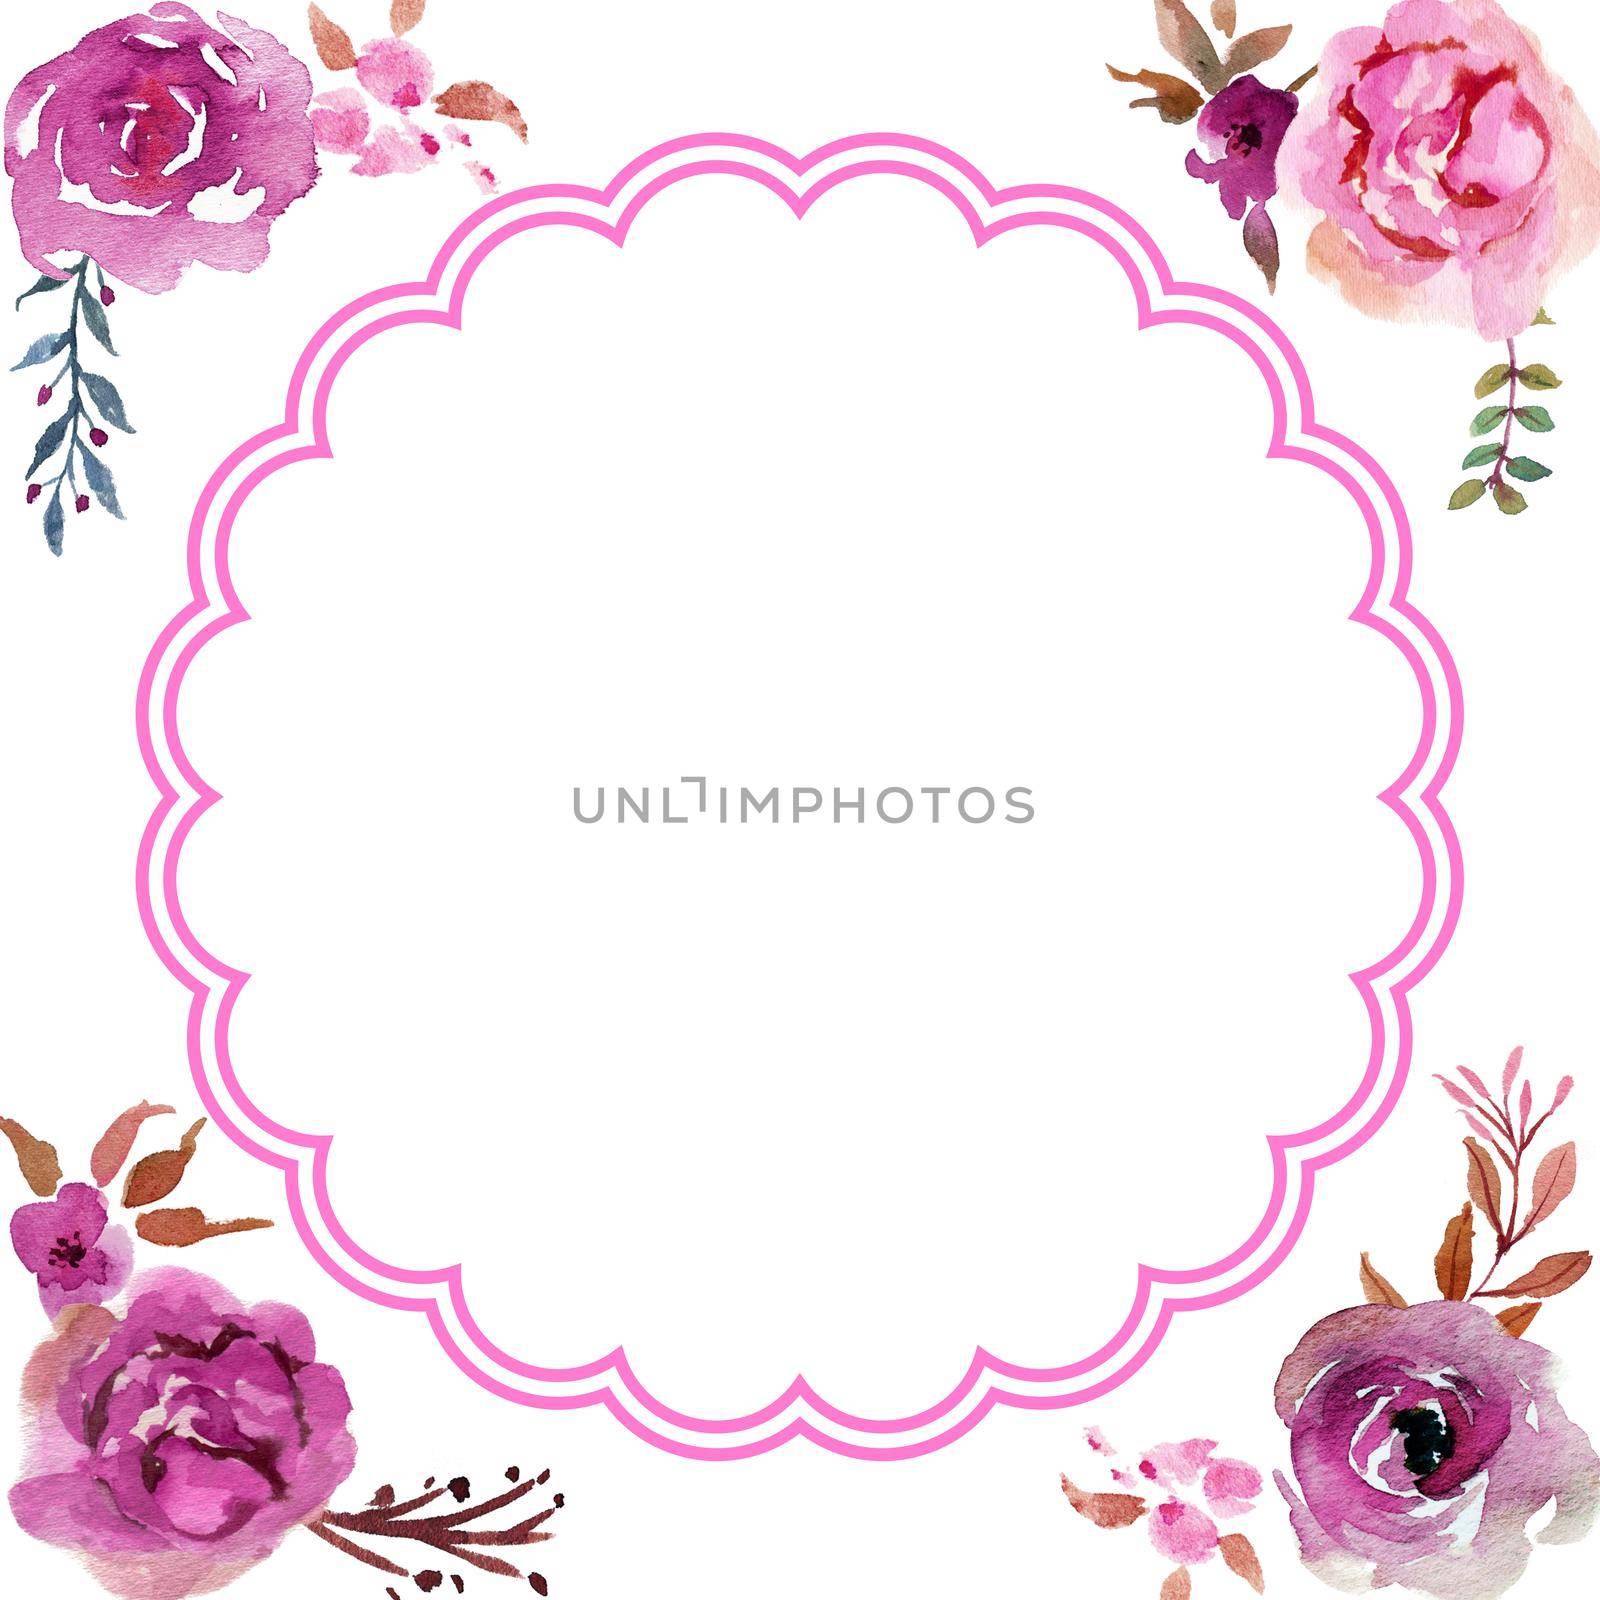 watercolor flower frame circle. Flower design card. Wedding card on simple background with round concept. All elements are isolated